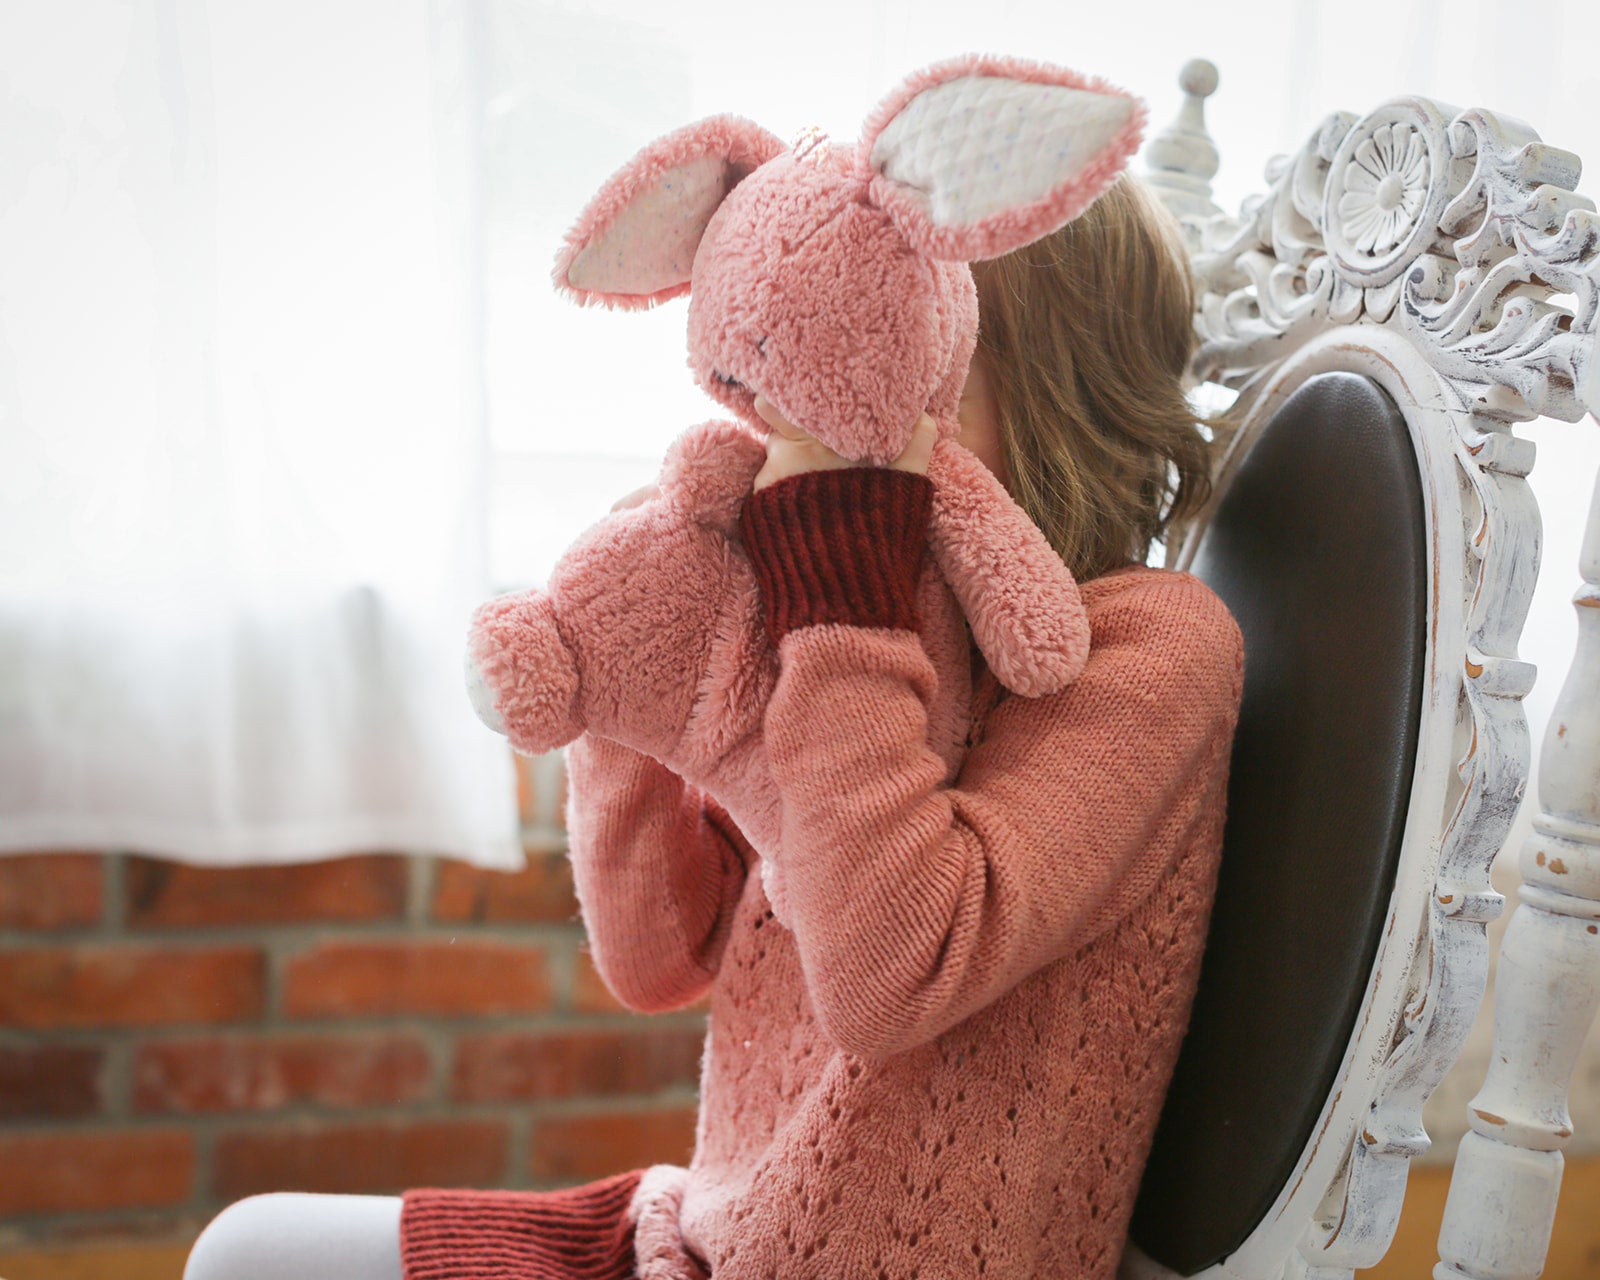 A young girl sits on a white antique chair, holding a pink stuffed animal up in front of her face. She wears a light pink knit dress, featuring dark pink cuffs, hem, and collar.